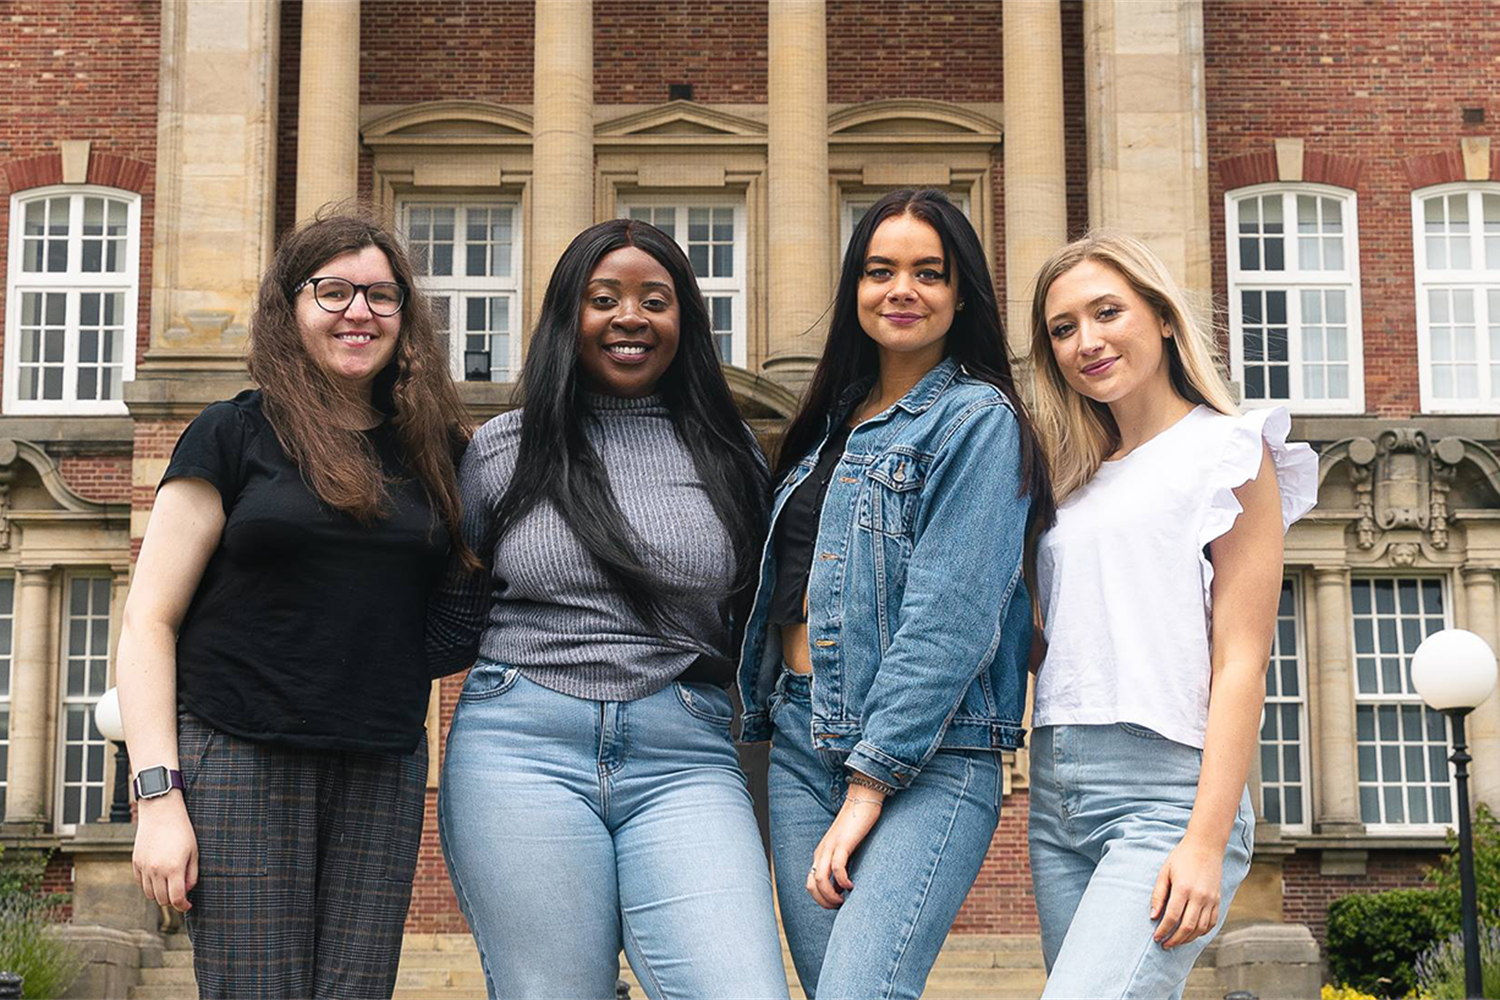 These students have been elected, by students at Leeds Beckett, to lead LBSU in 2021/22. Each of them represent your interests at the highest levels of university and work on their own projects and objectives with the aim of making students' lives better.